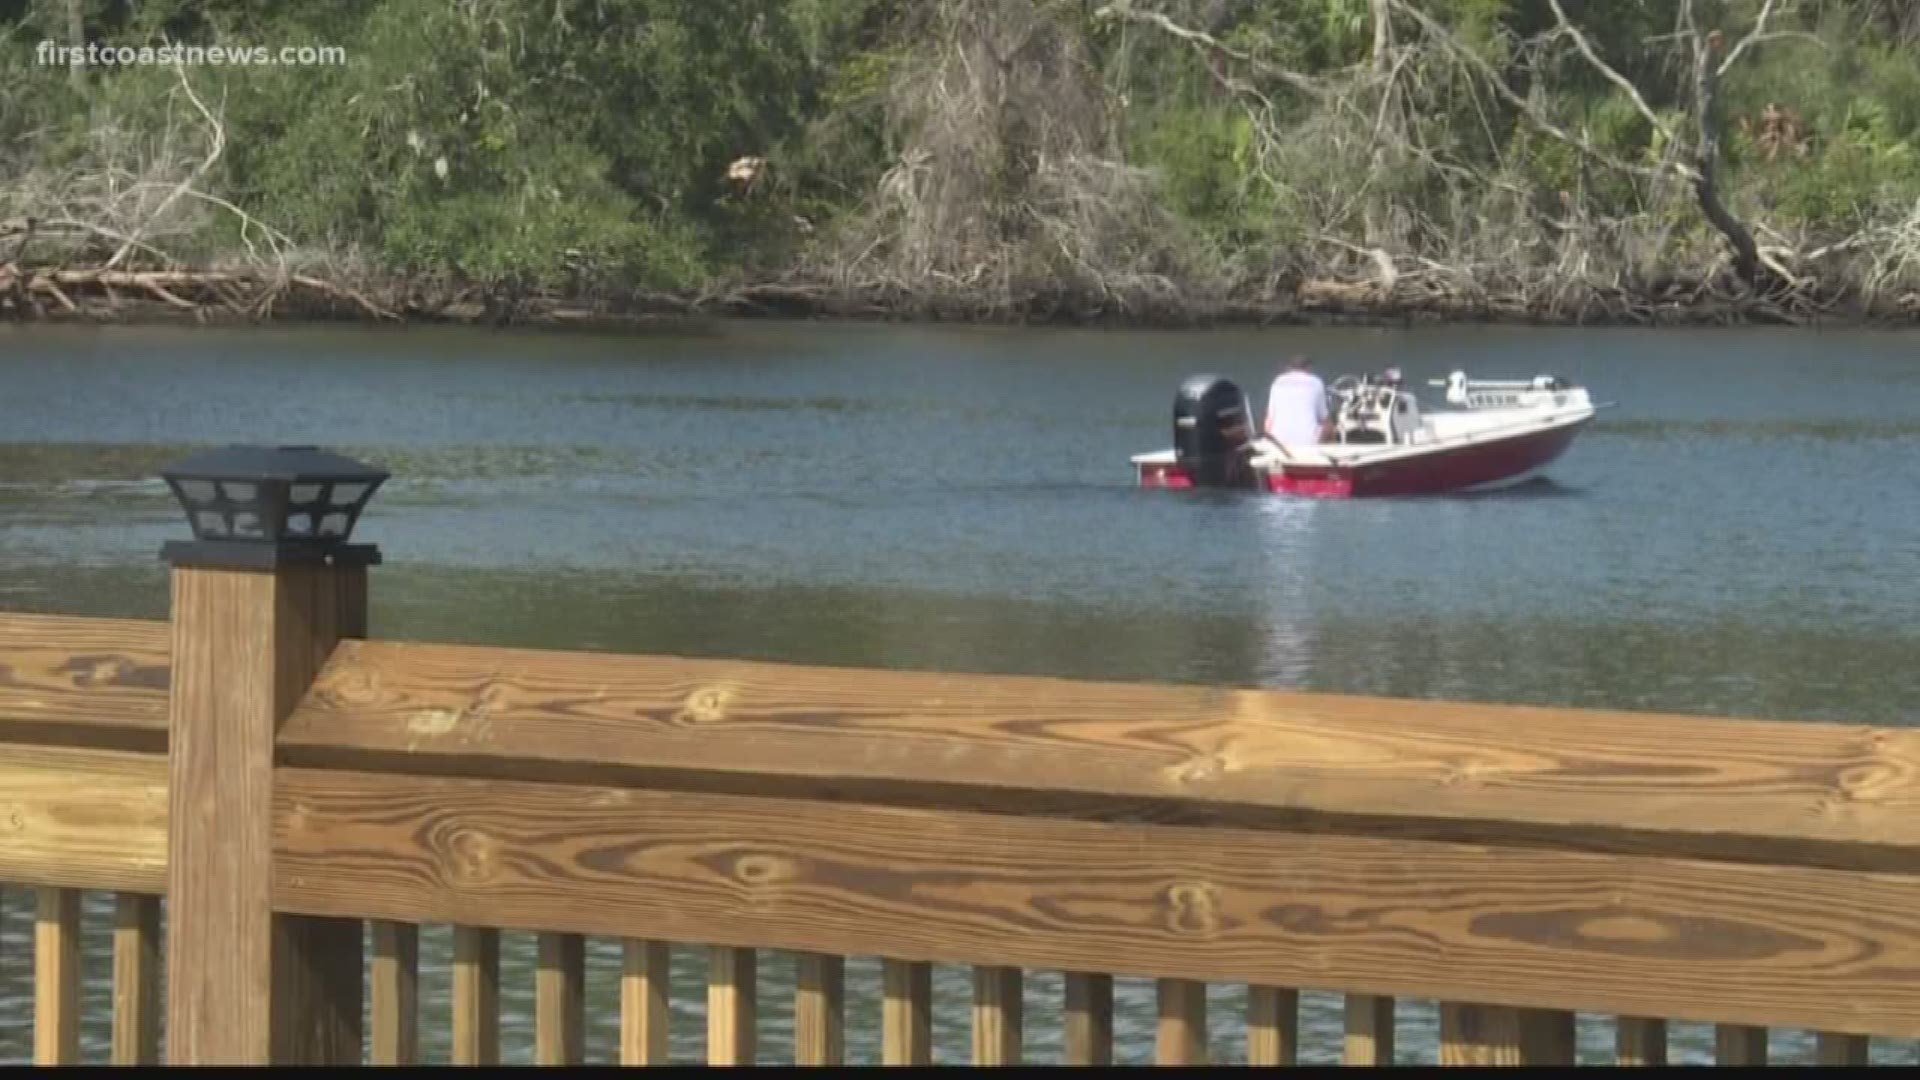 A new dock will increase access to the Intracoastal Waterway in St. Johns County.